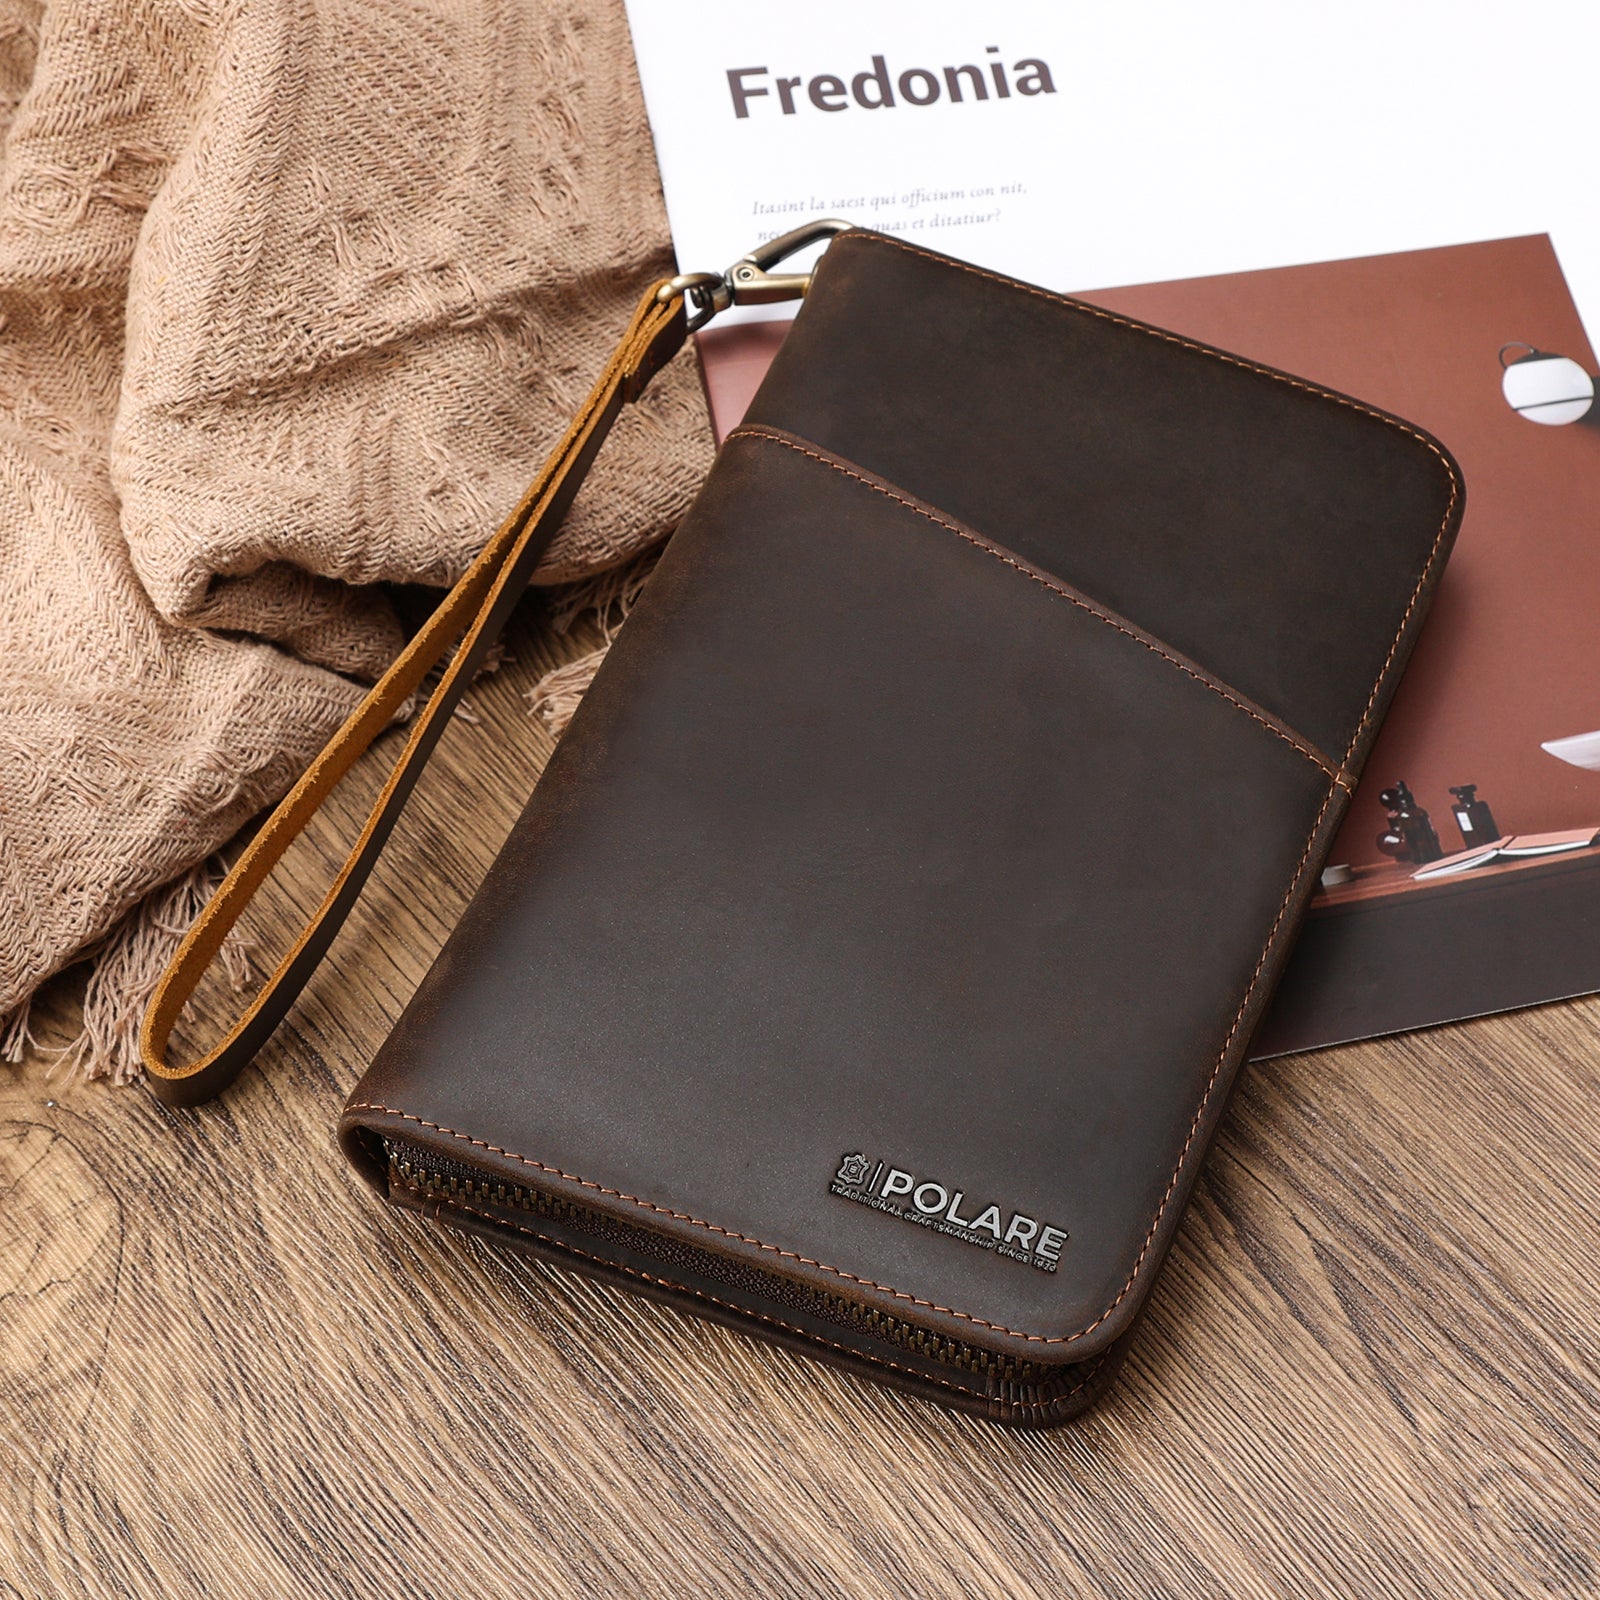 Polare Leather Tri-fold Wallet for Men - Full Grain Leather Extra Capa